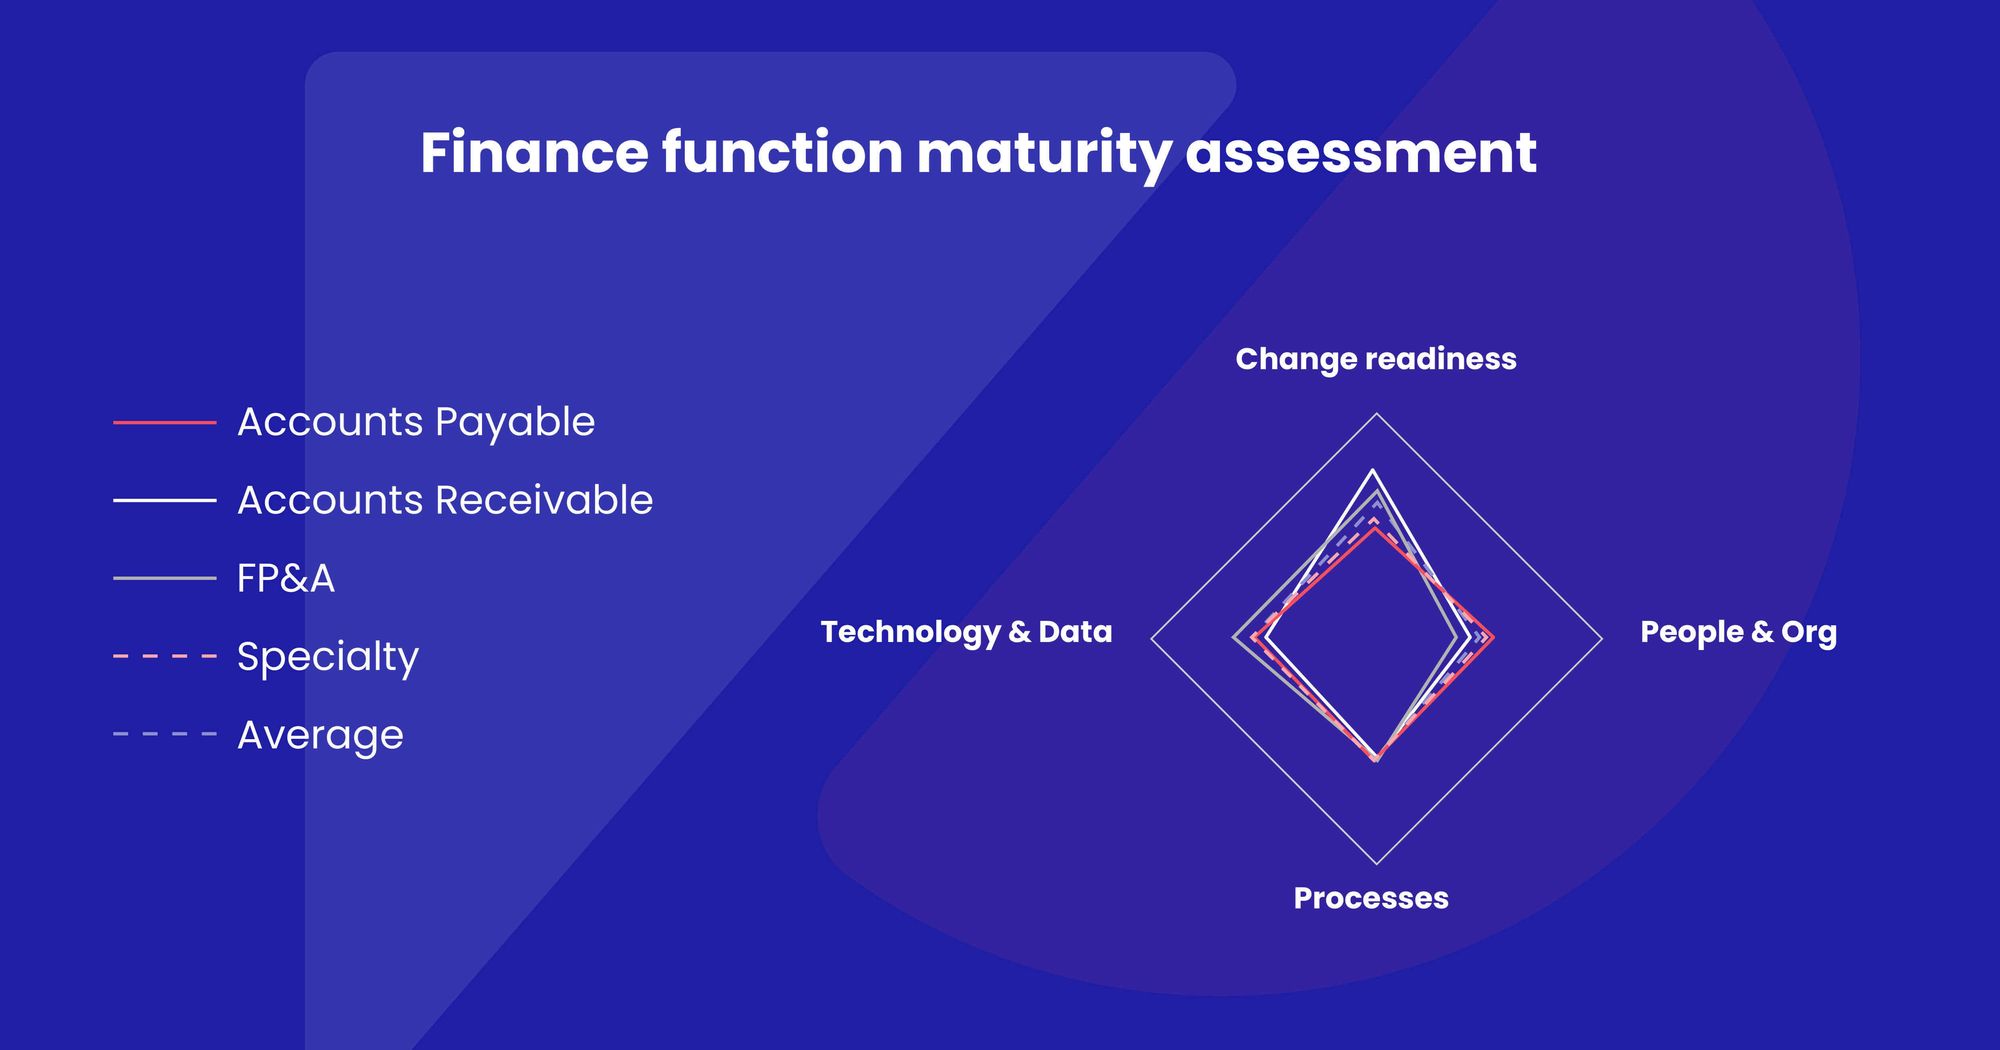 Finance function maturity assessment image - change readiness, people, processes, and technology